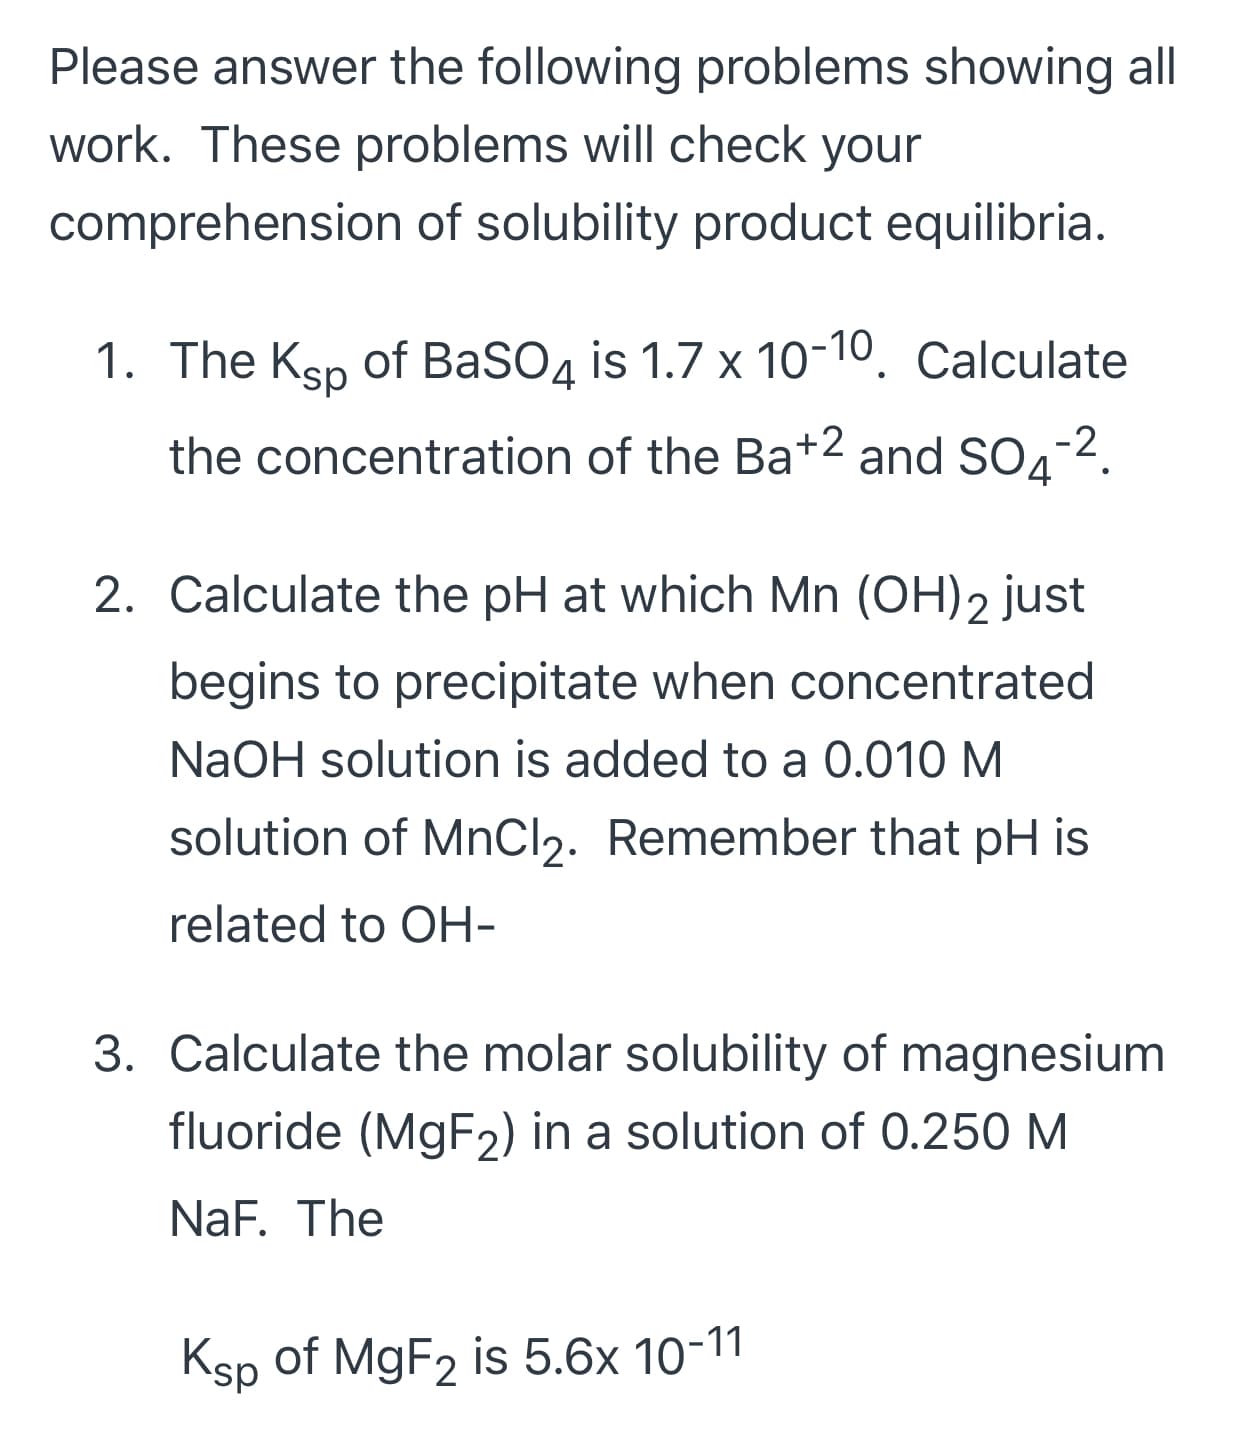 The Ksp of BaSO4 is 1.7 x 10-10. Calculate
the concentration of the Ba+2 and SO4-2.
